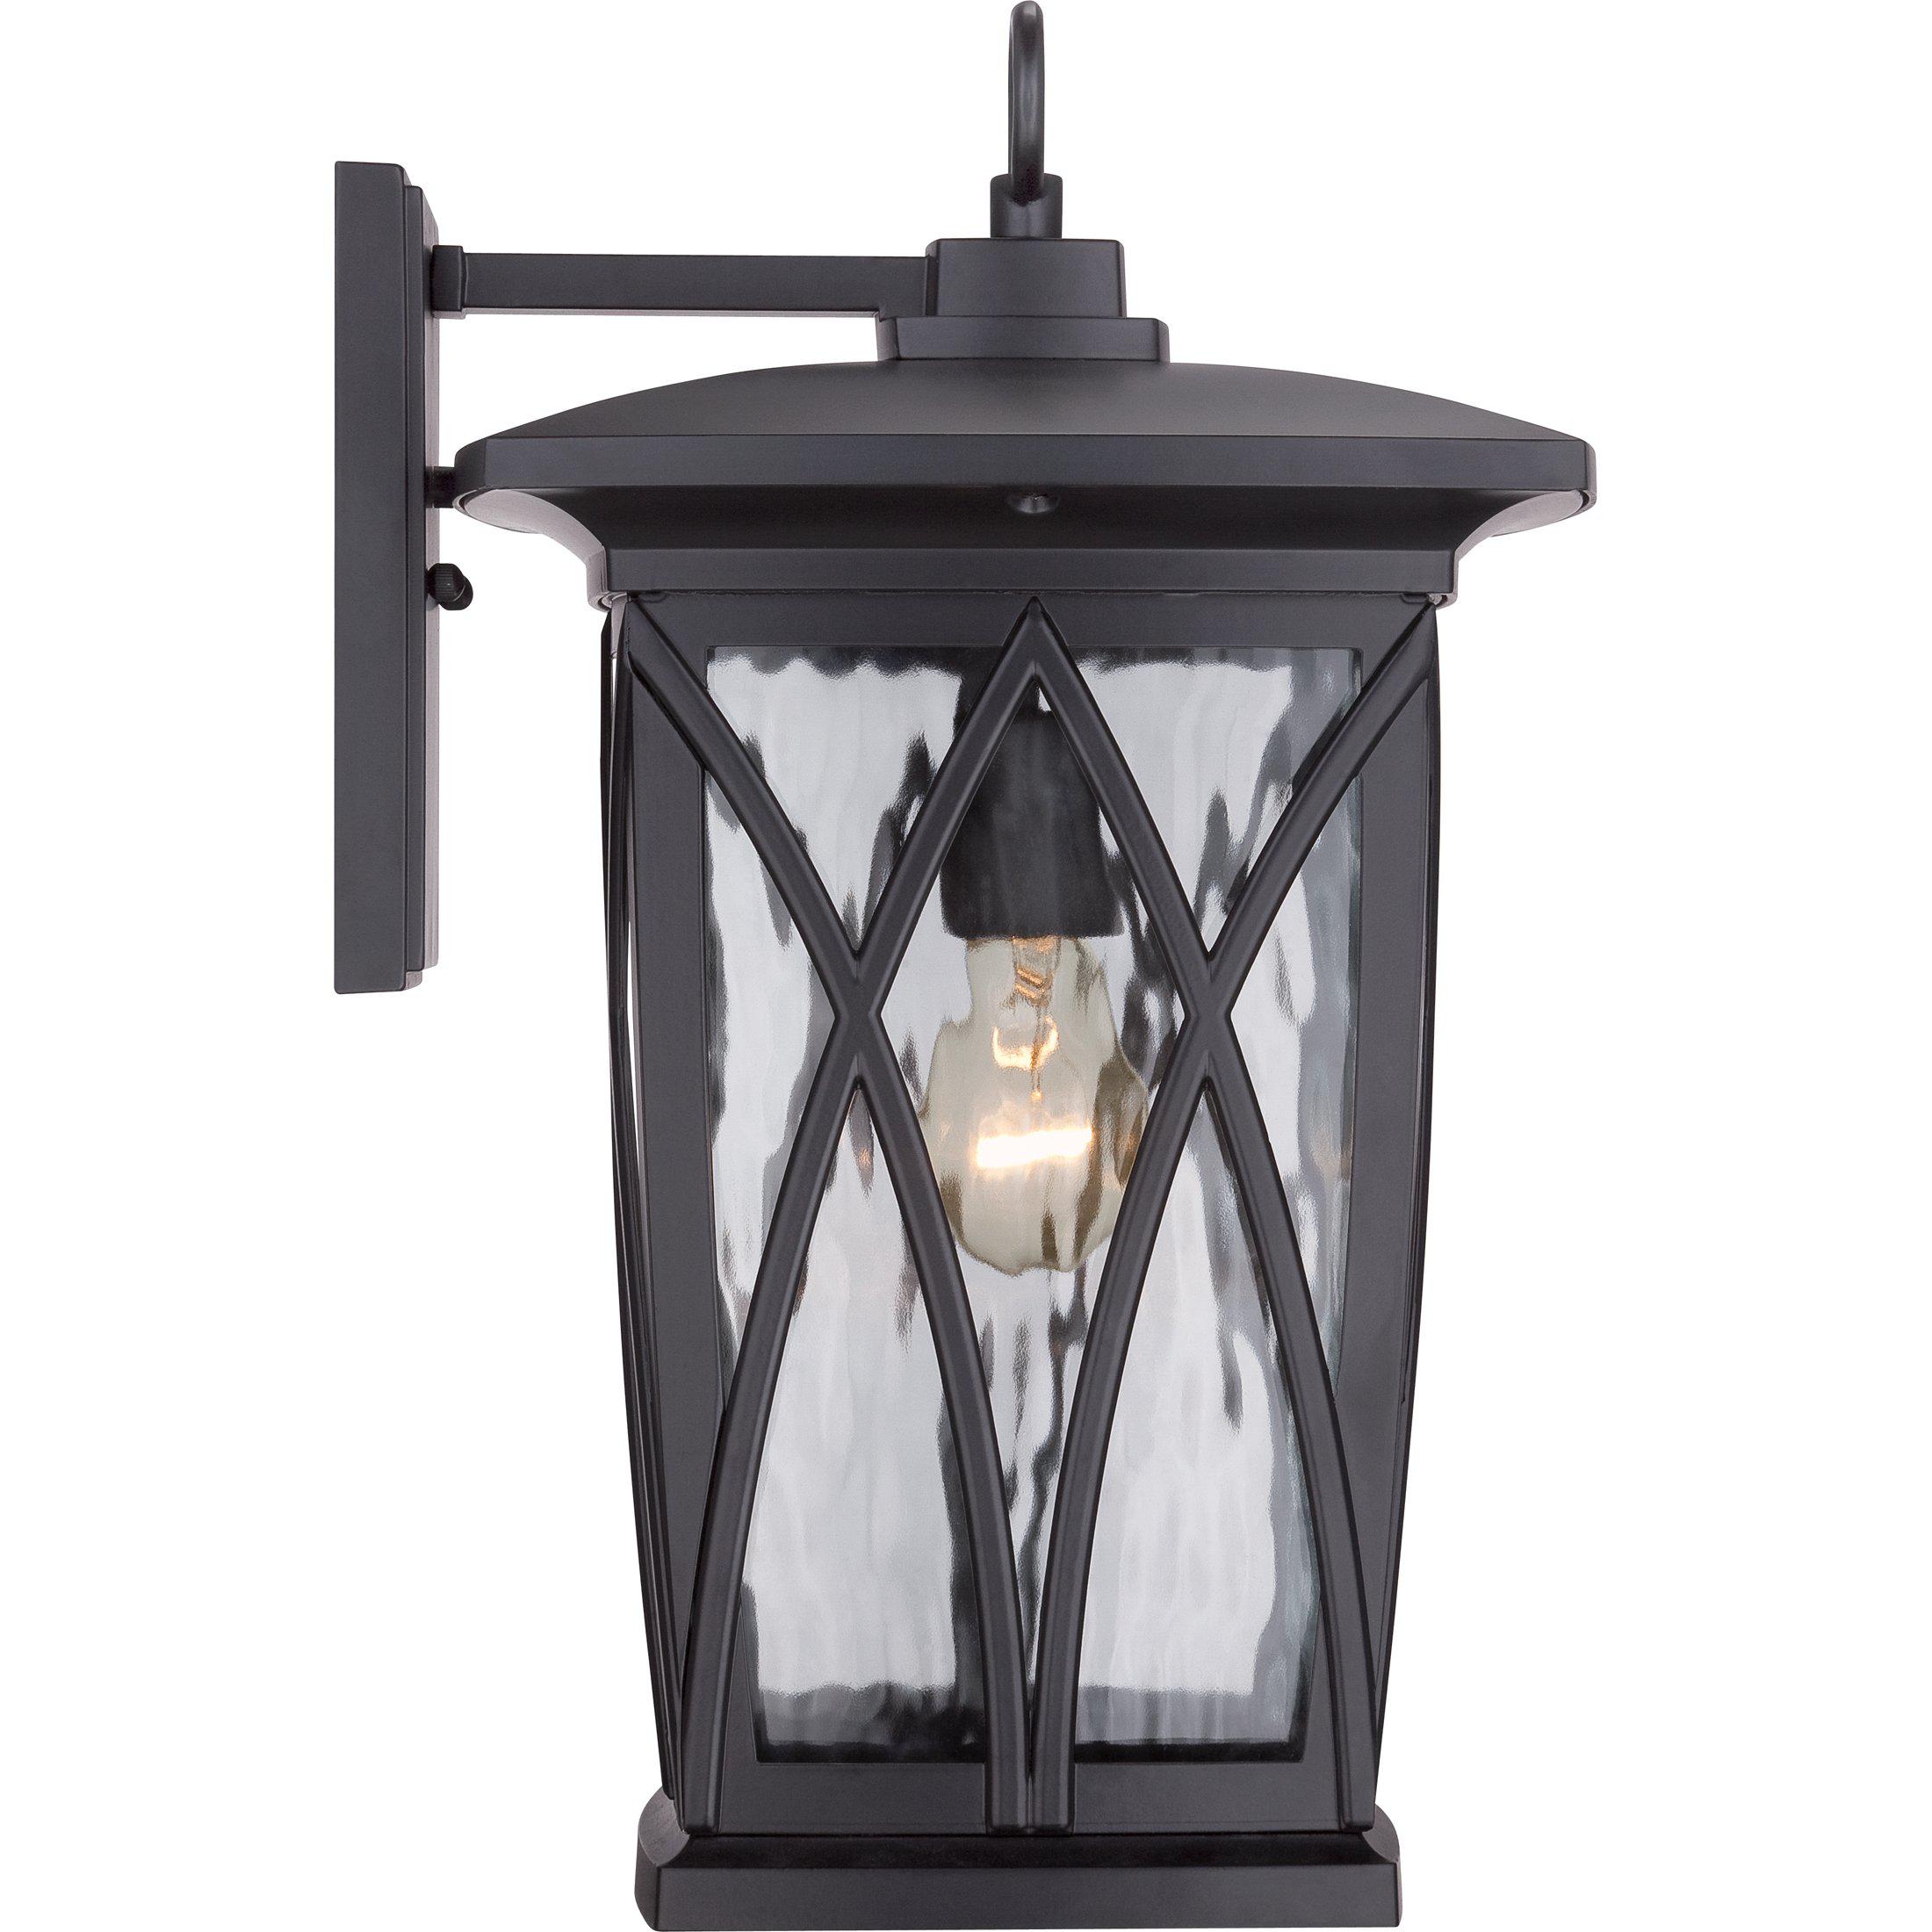 Quoizel Grover Outdoor Lantern, Large